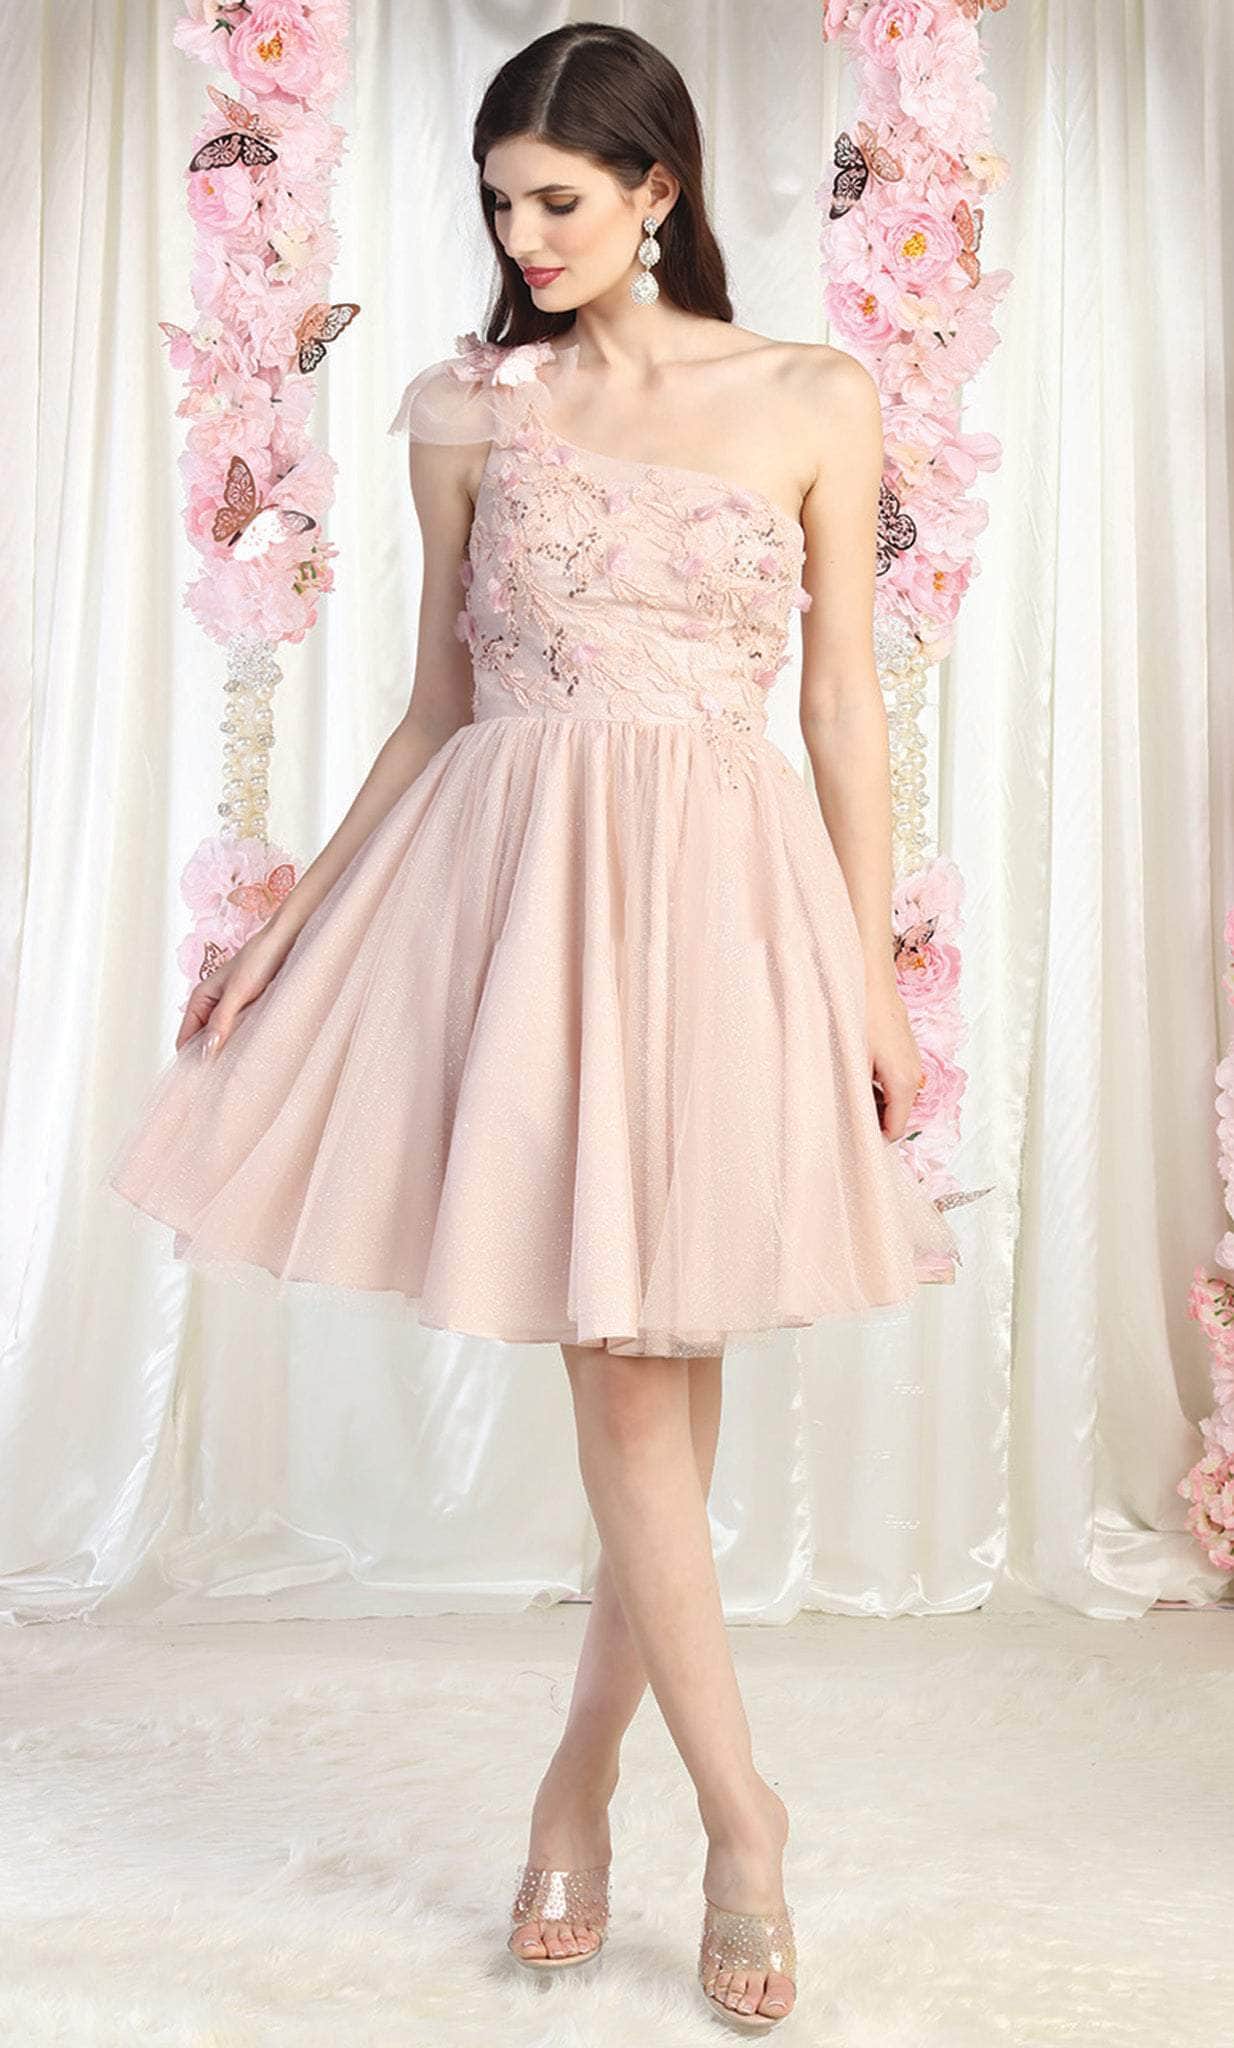 May Queen MQ1952 - One Shoulder A-Line Cocktail Dress Cocktail Dresses 4 / Blush